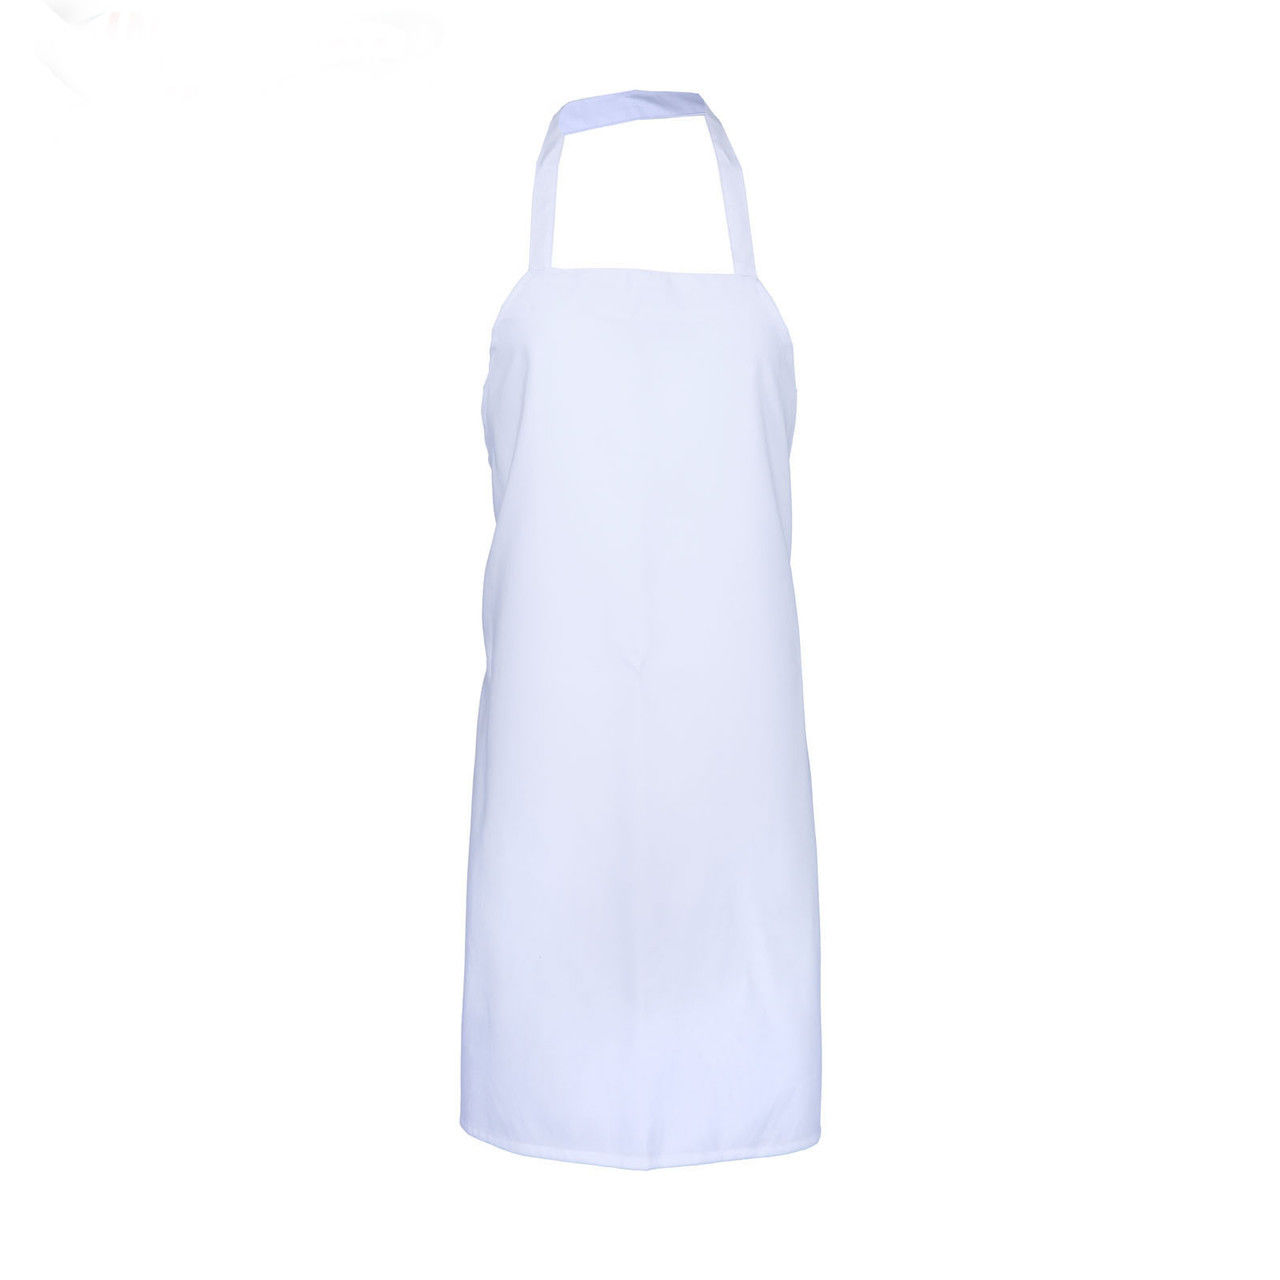 How big are the pinnacle aprons?